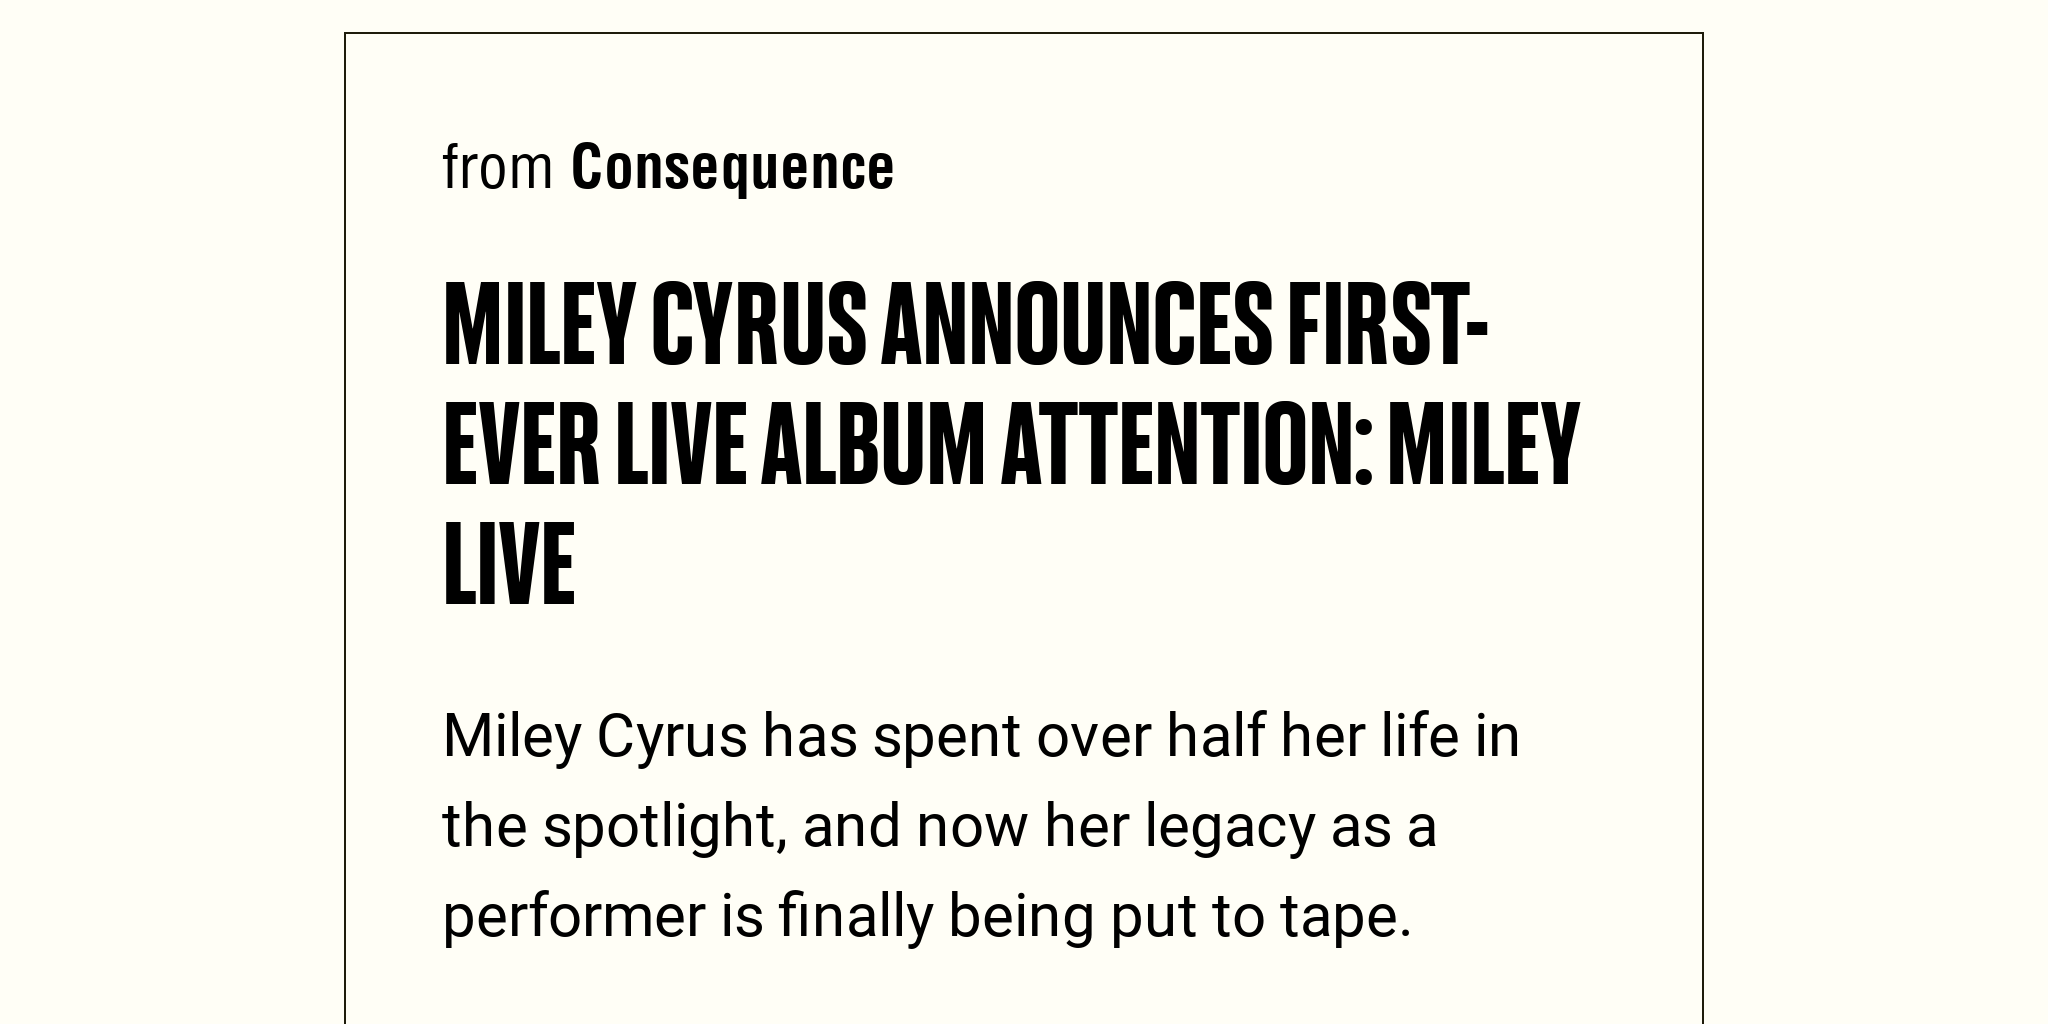 Miley Cyrus Announces First Ever Live Album Attention Miley Live Briefly 5861